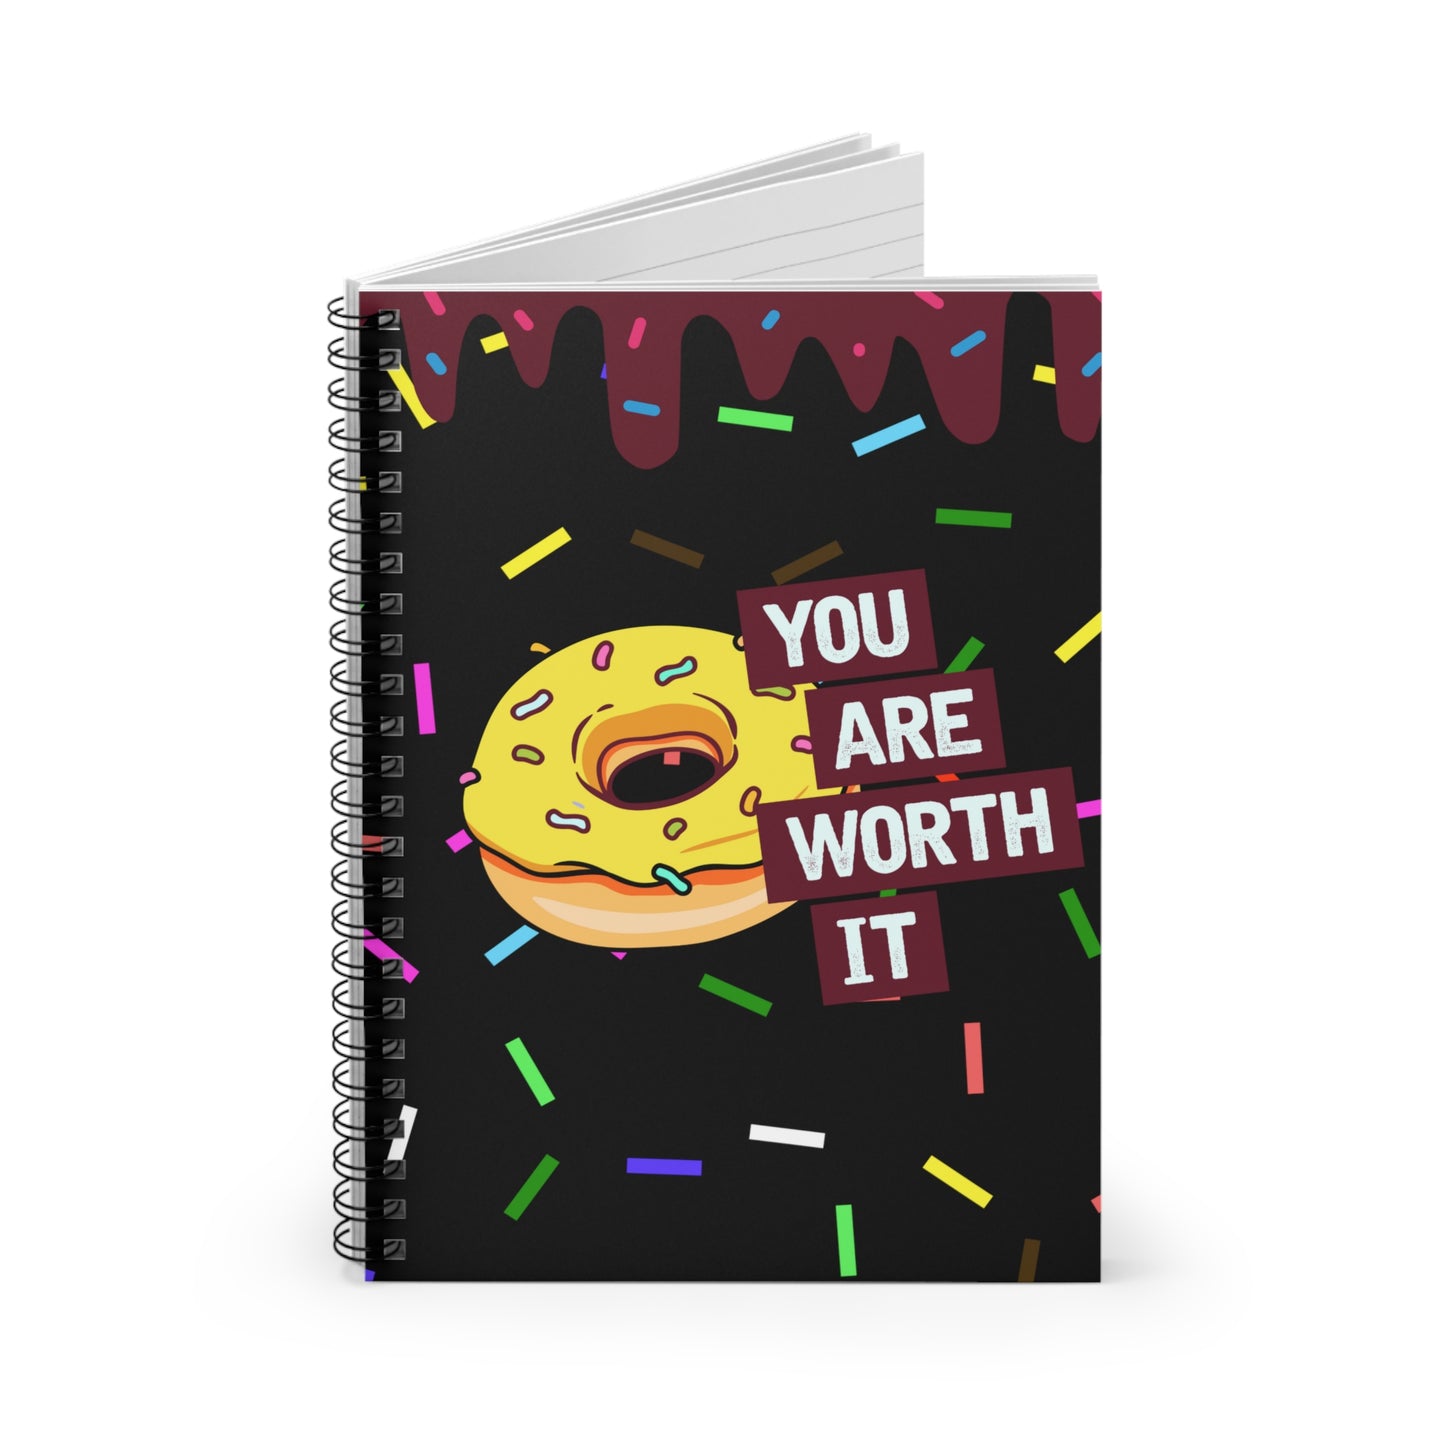 You are Worth it: Spiral Notebook - Log Books - Journals - Diaries - and More Custom Printed by TheGlassyLass